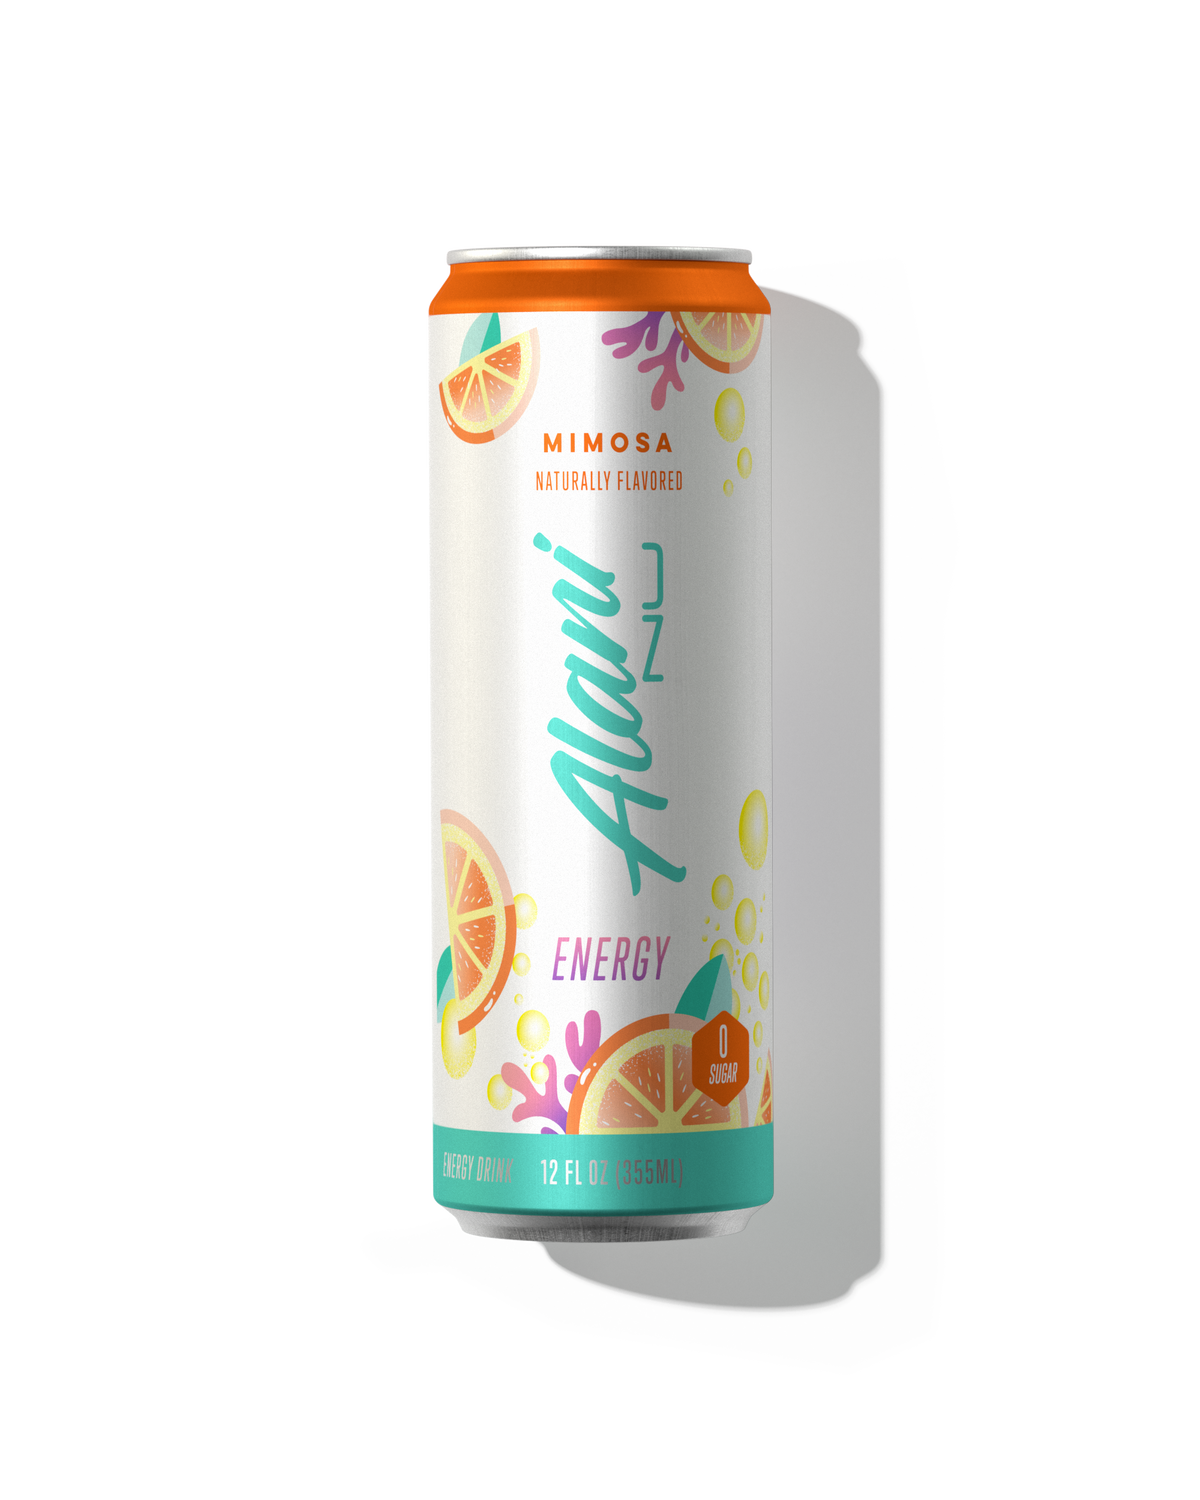 A can of Alani Nu Energy Drink - Mimosa, 12 fluid ounces (355 ml), with vibrant fruit and bubble graphics on a white and orange background.